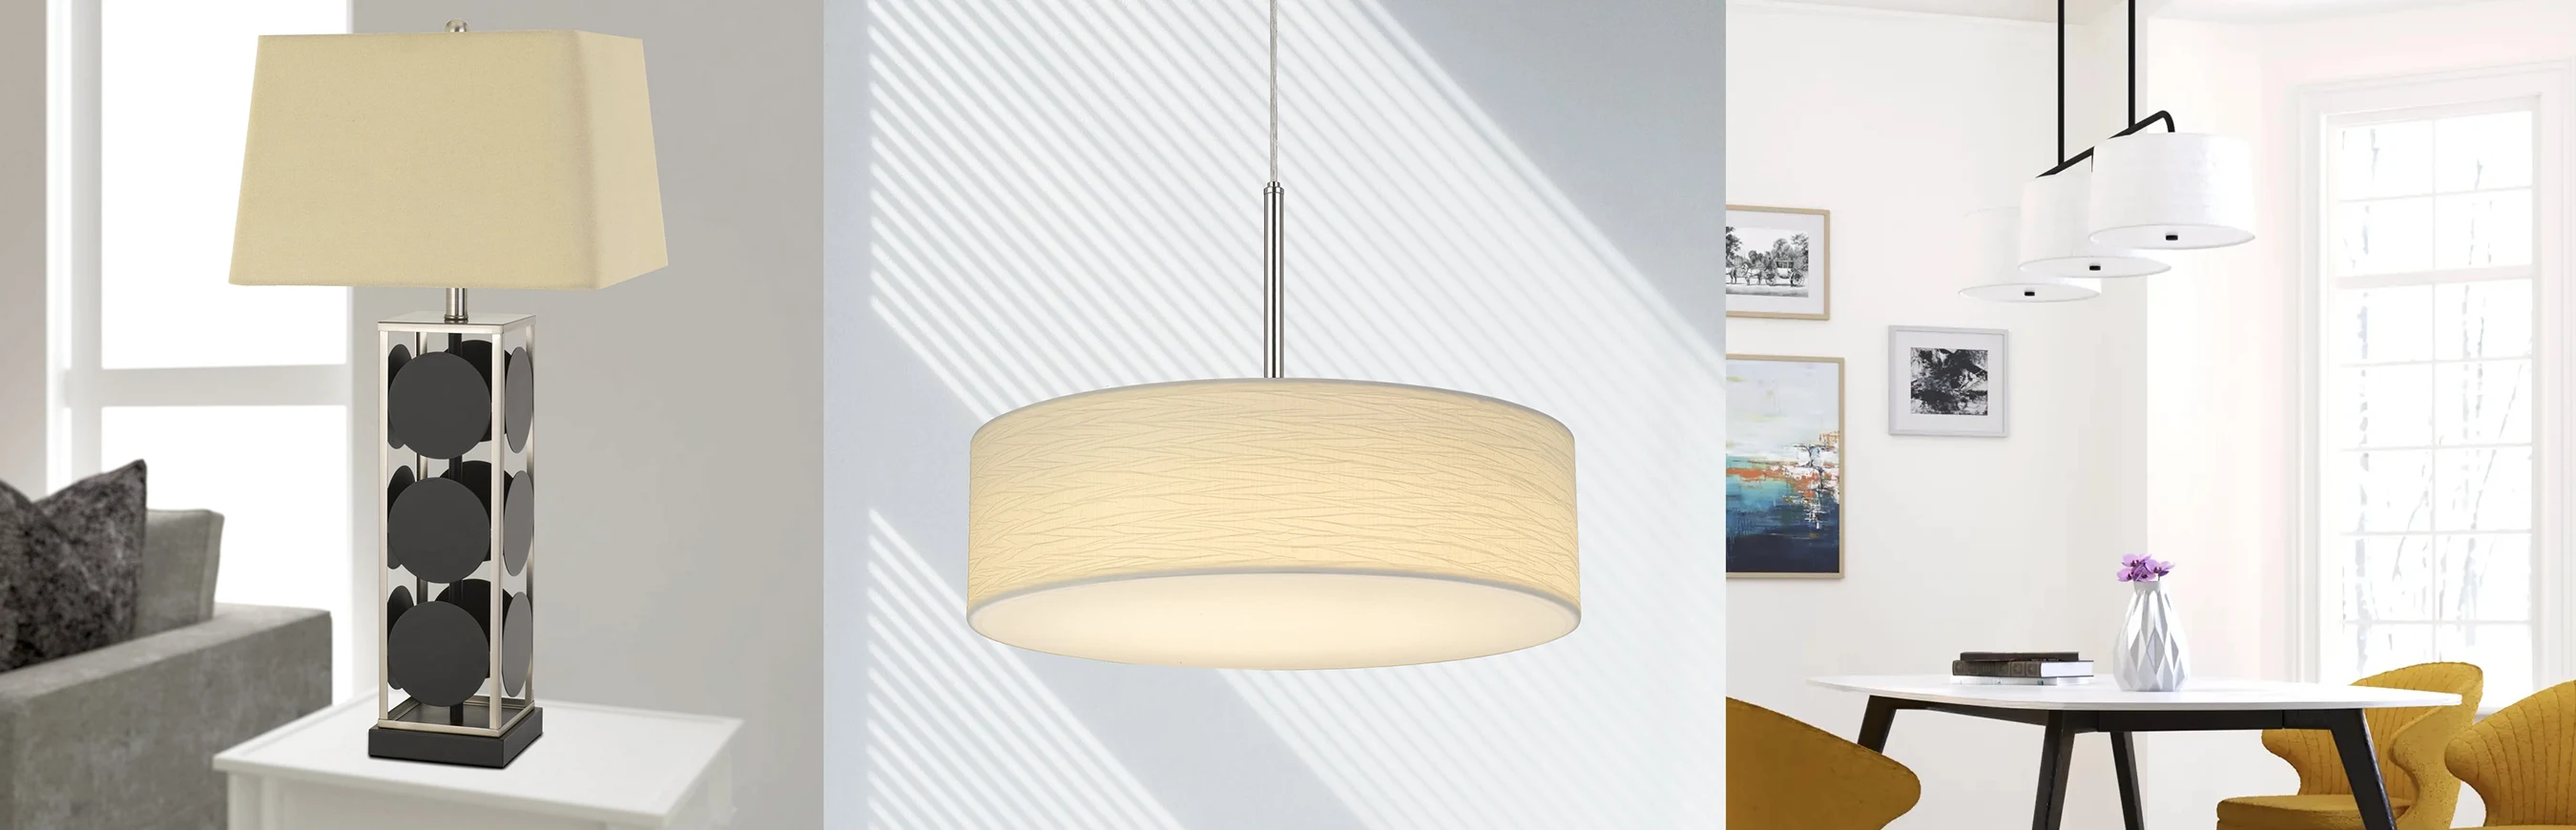 Lines Lamp Shades for Chandeliers, Floor Lamps and Table Lamps